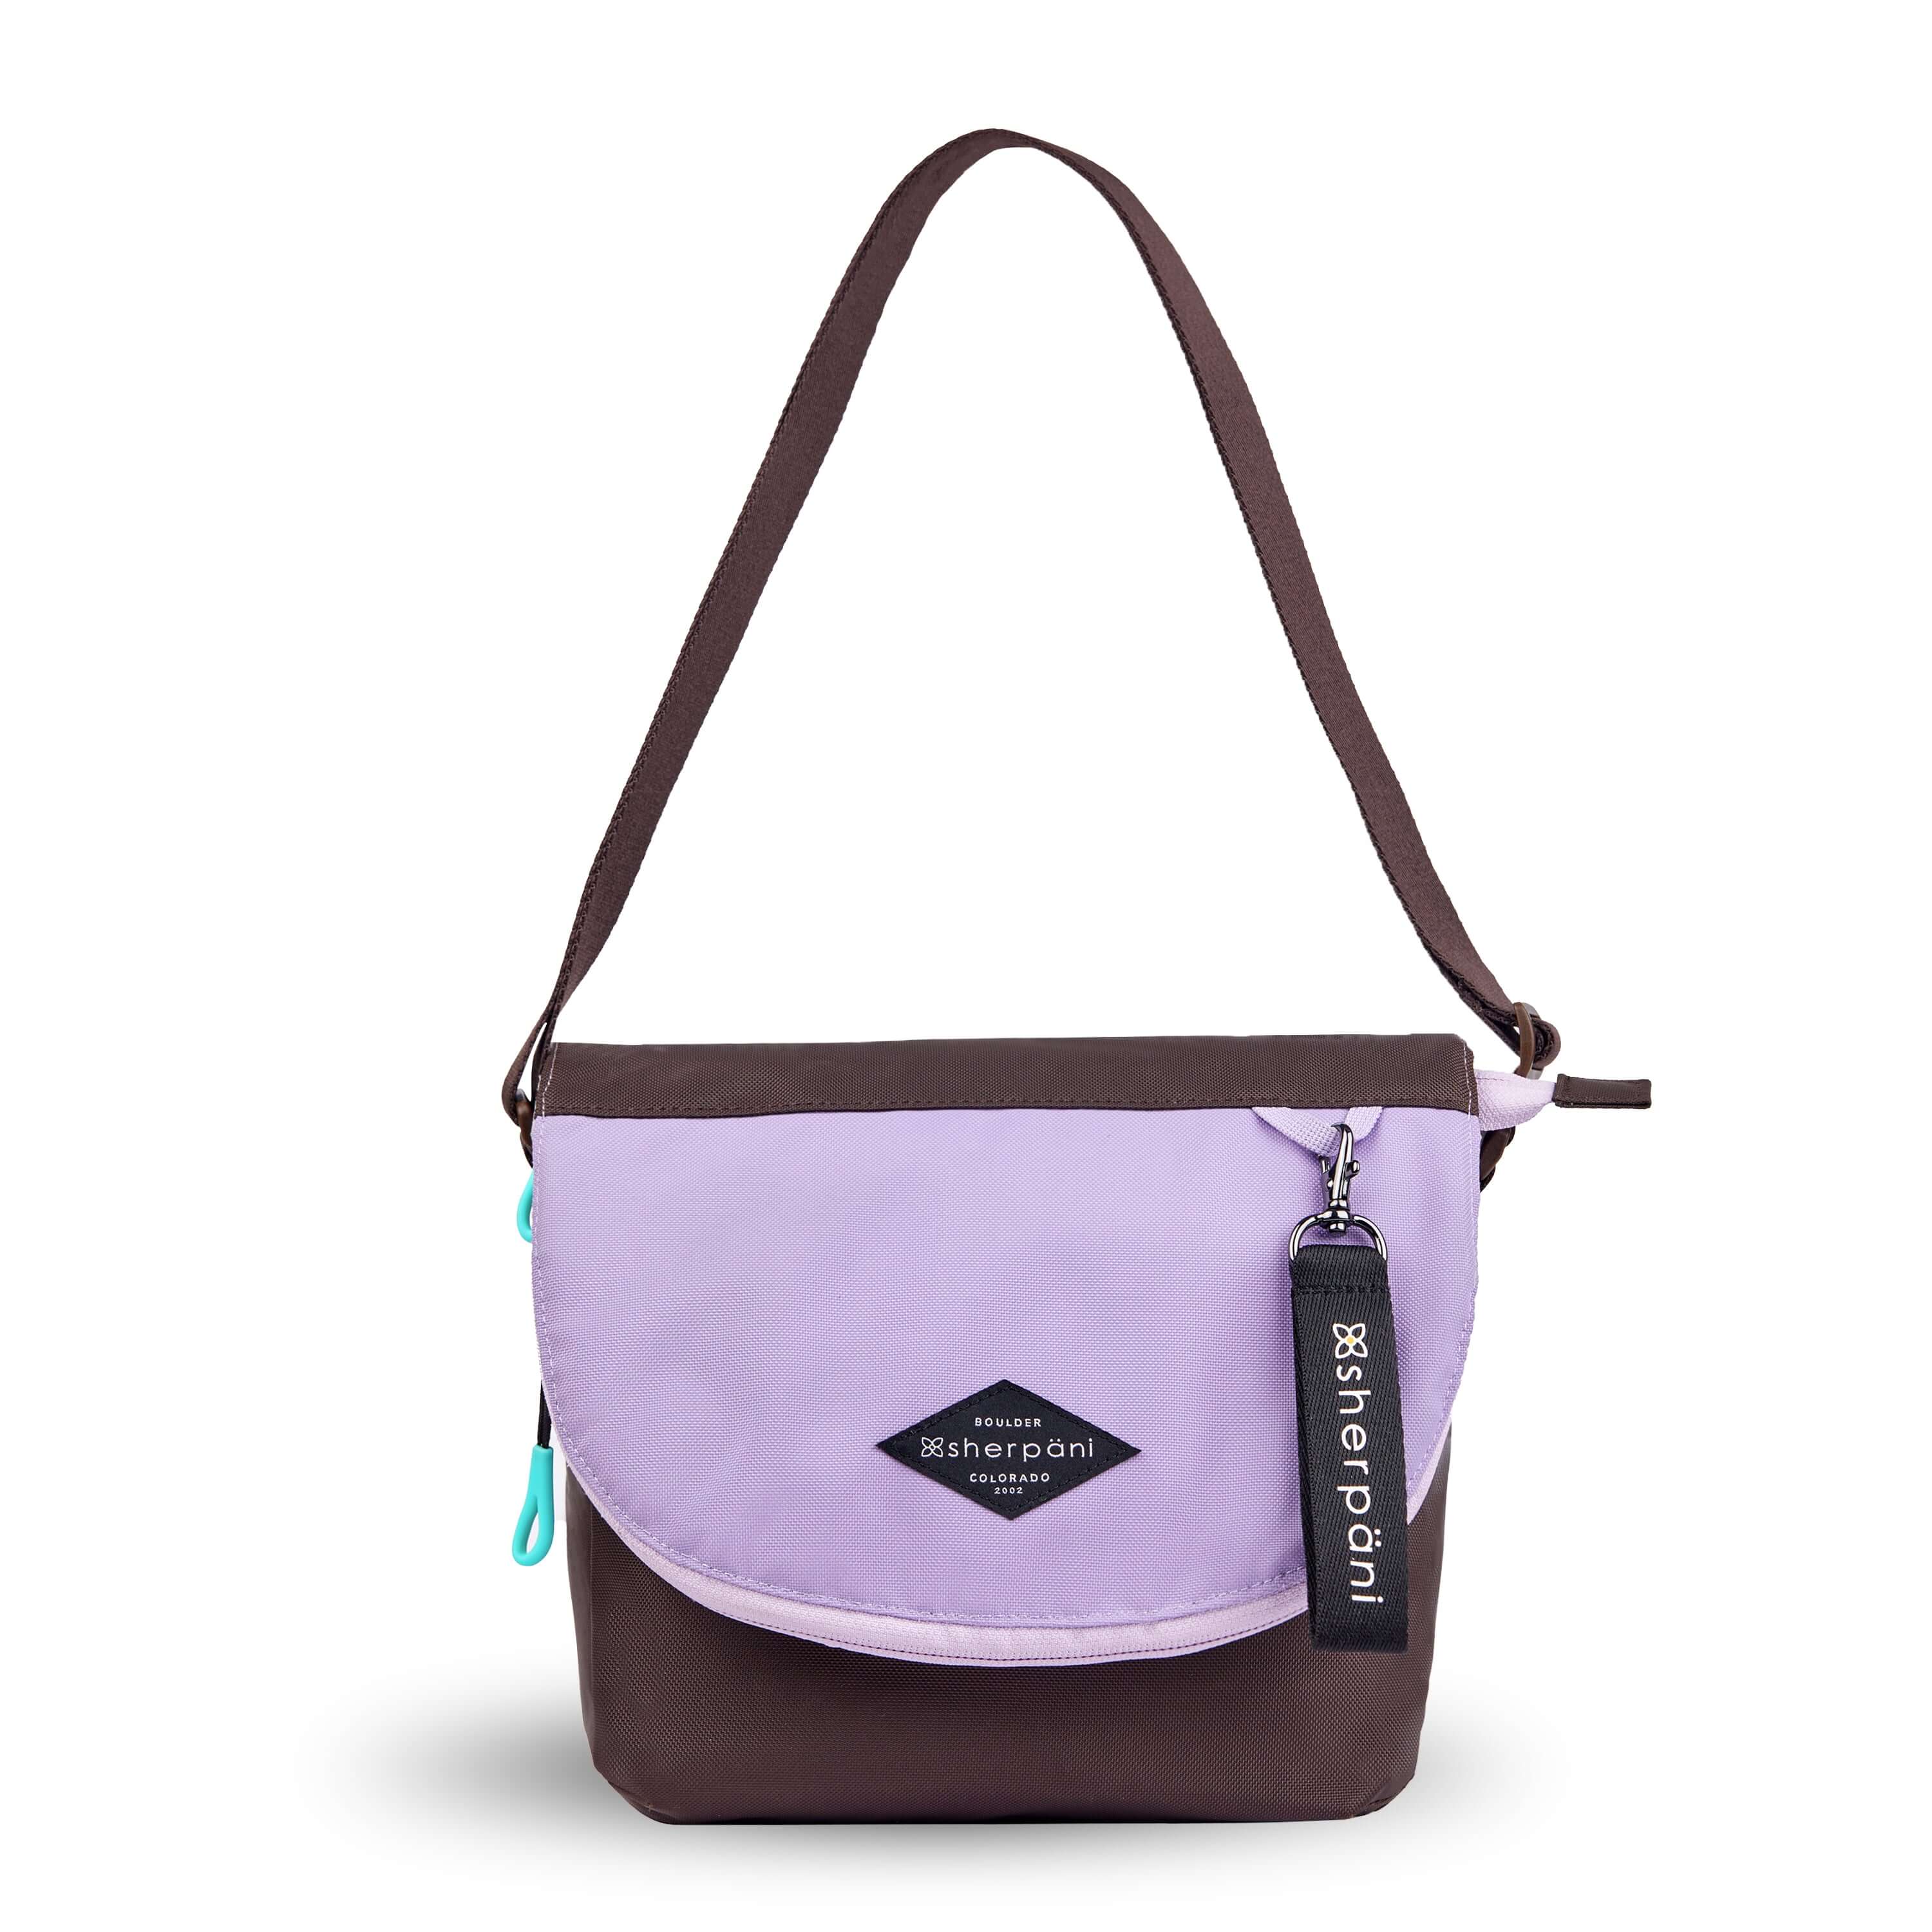 Flat front view of Sherpani crossbody, the Milli in Lavender. The messenger style bag is two-toned: the layover flap is lavender, the remainder of the bag is brown. Easy-pull zippers are accented in aqua. The bag has an adjustable crossbody strap. A branded Sherpani keychain is clipped to a fabric loop in the upper right corner.